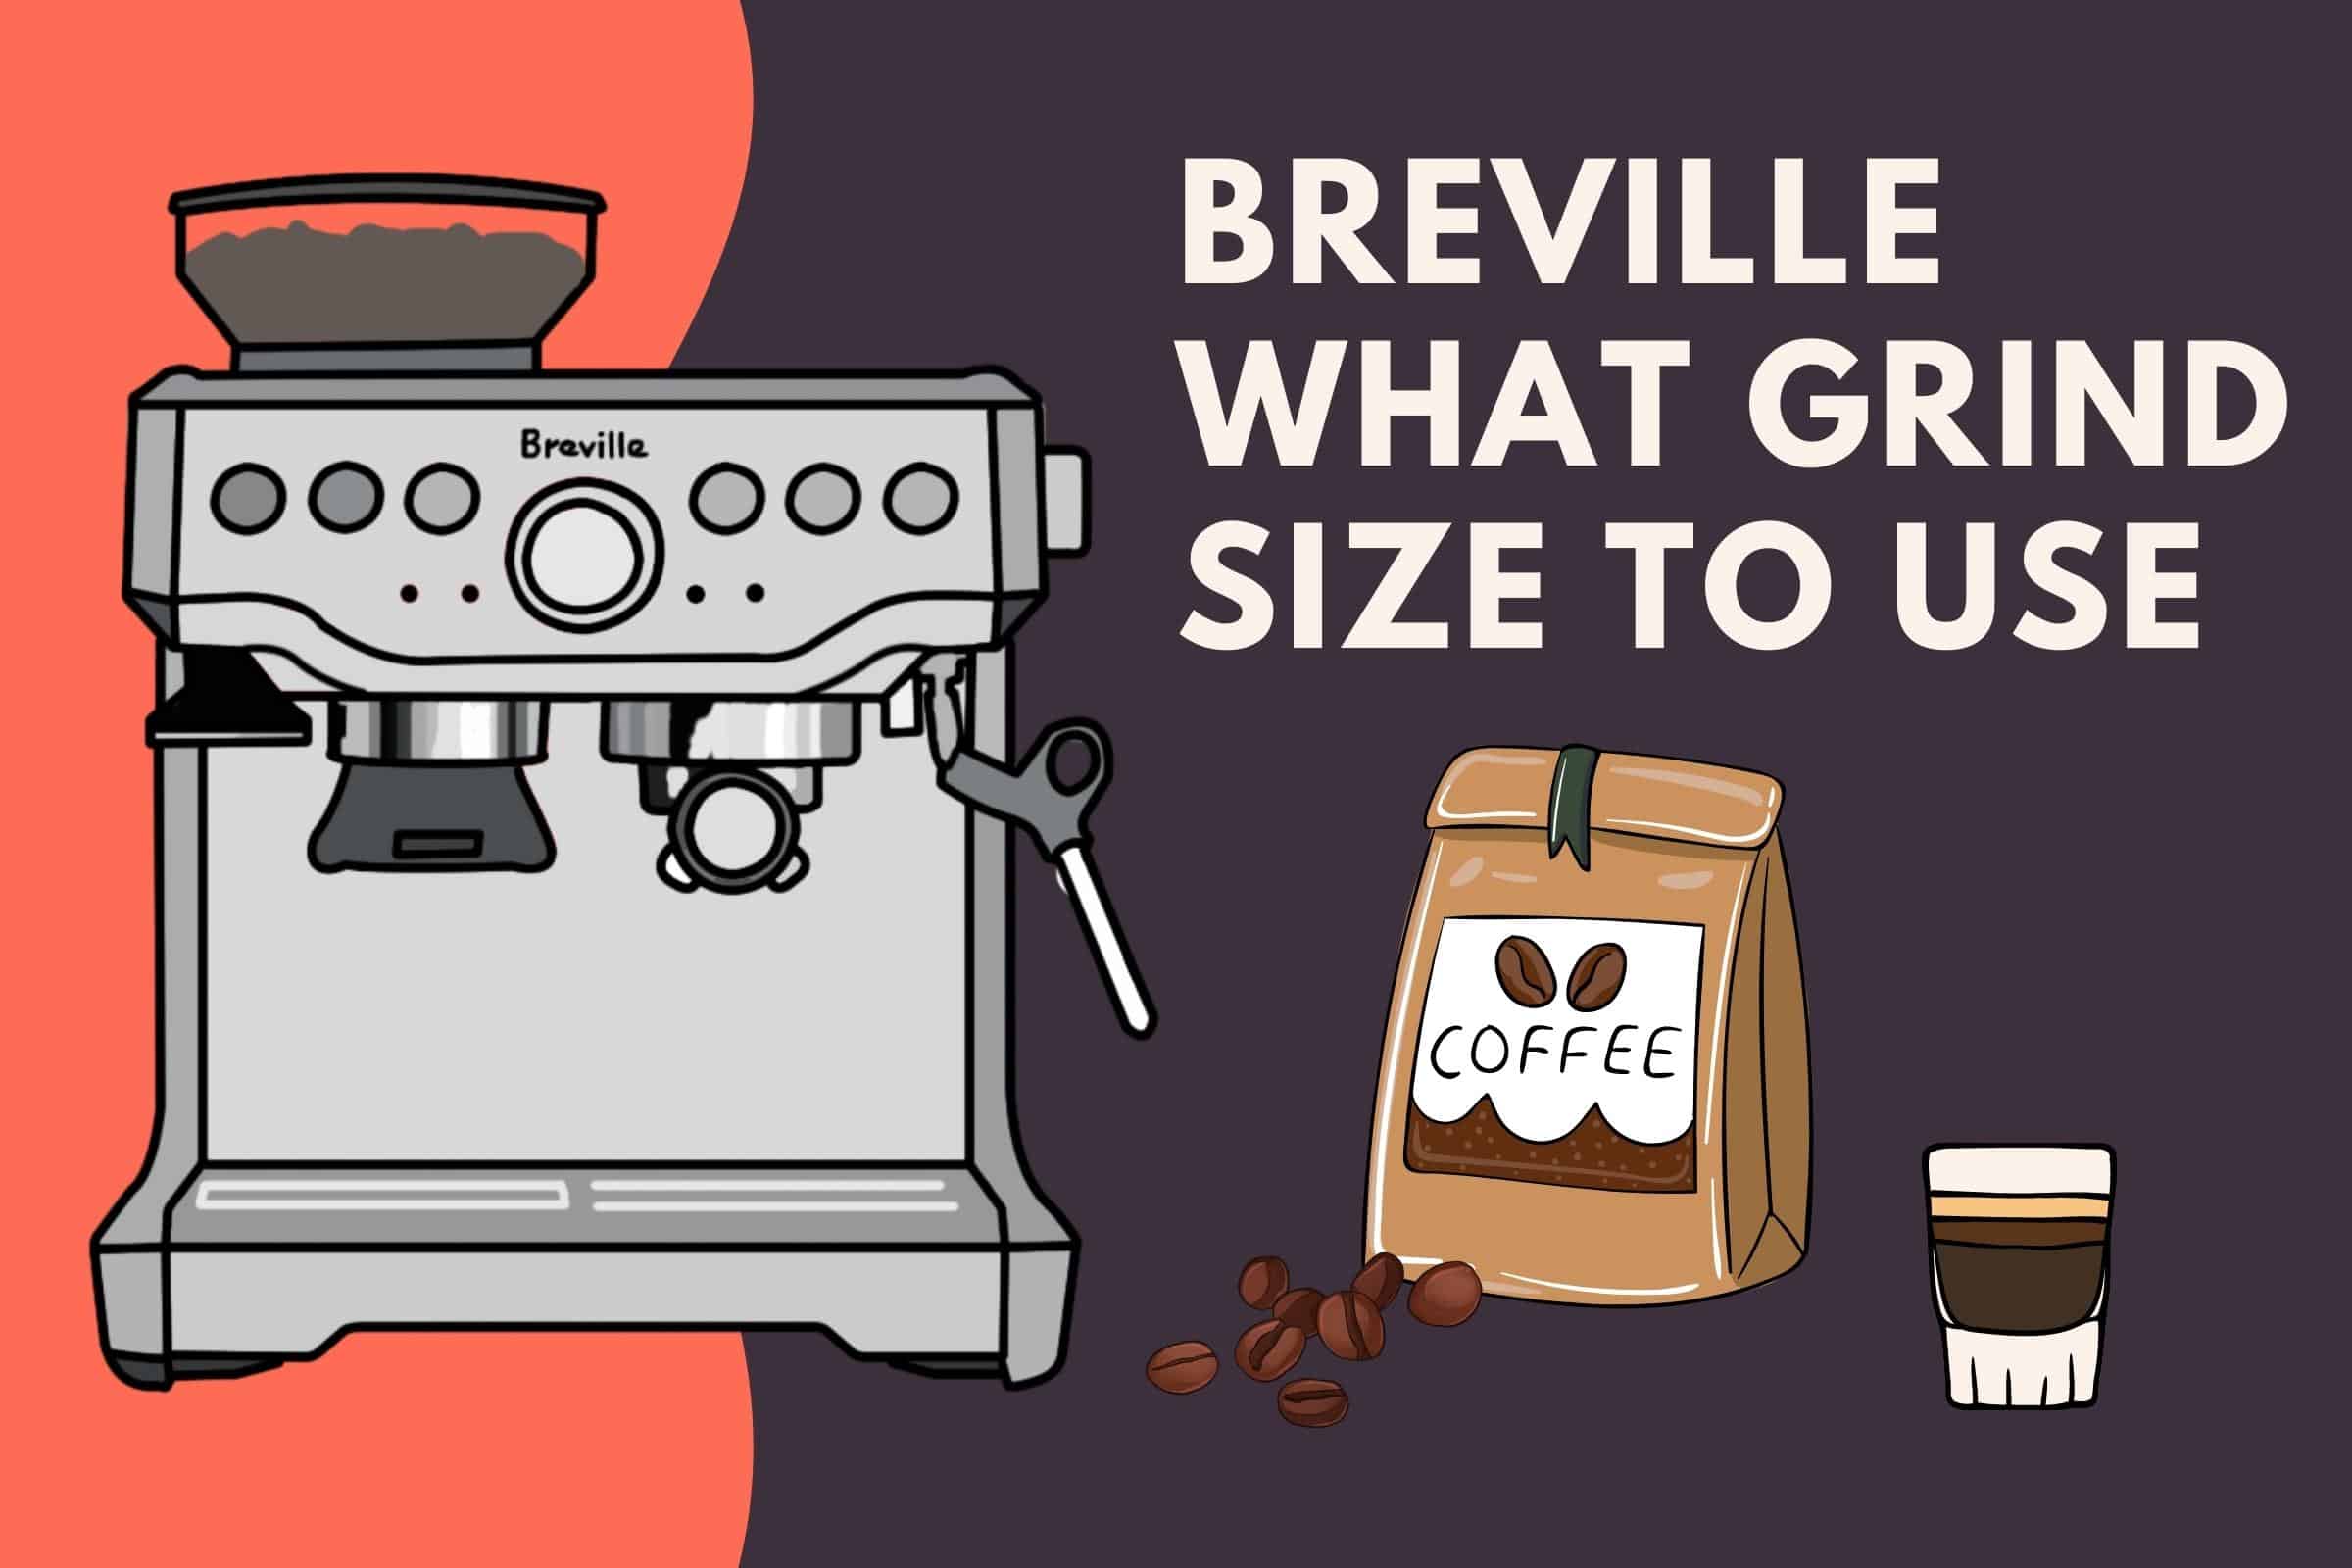 Breville what grind size to use